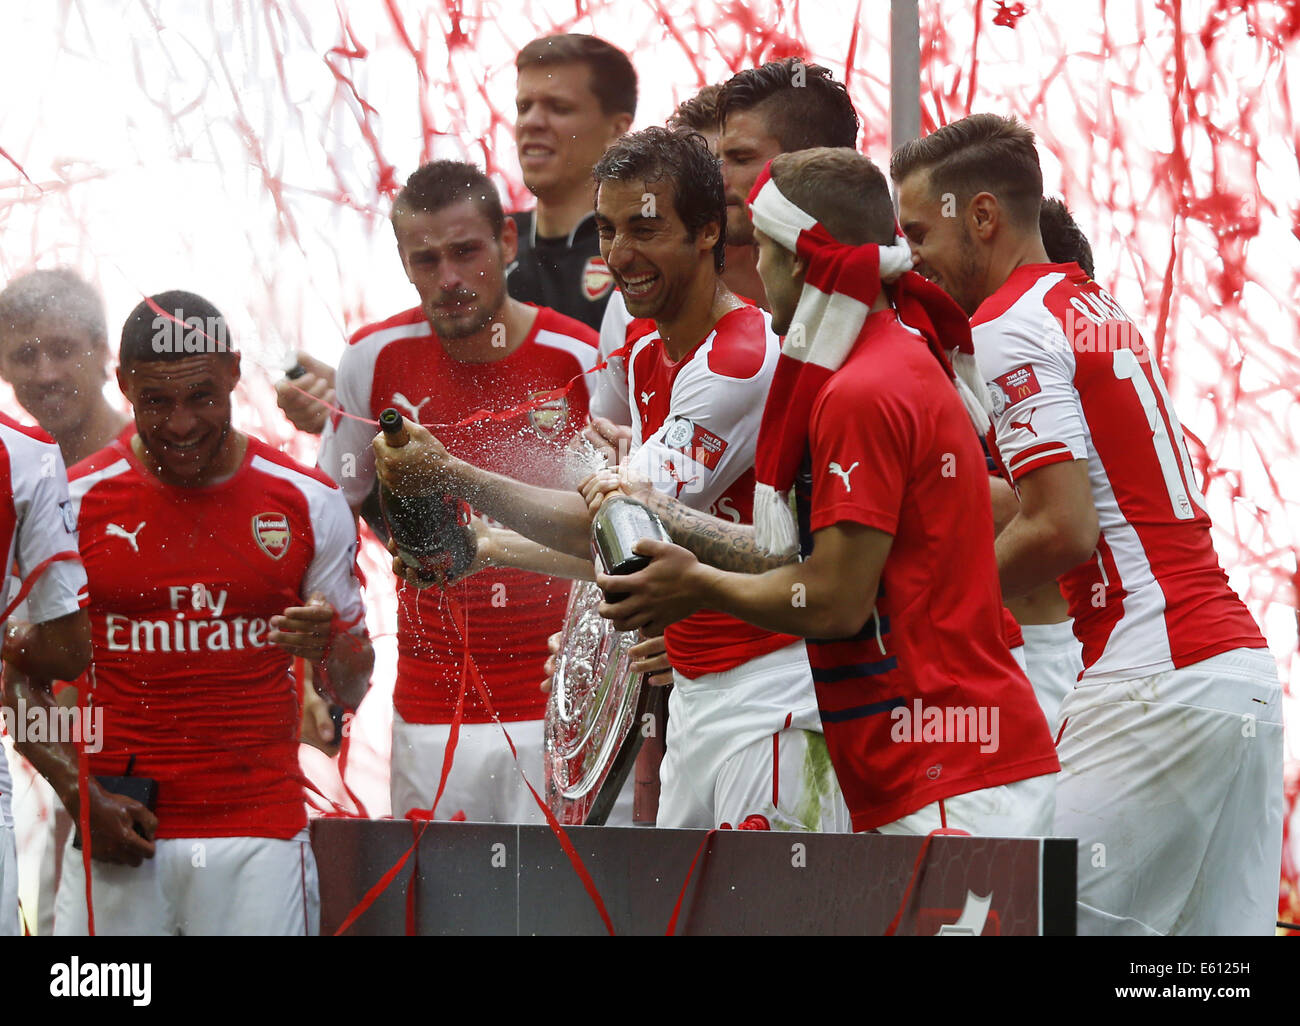 London, R) of Arsenal celebrate by spraying champagne towards teammates after the Community Shield match between Arsenal and Manchester City at Wembley Stadium in London. 10th Aug, 2014. Mathieu Flamini(C) and Jack Wilshere(2nd, R) of Arsenal celebrate by spraying champagne towards teammates after the Community Shield match between Arsenal and Manchester City at Wembley Stadium in London, Britain on Aug. 10, 2014. Arsenal won 3-0. Credit:  Wang Lili/Xinhua/Alamy Live News Stock Photo